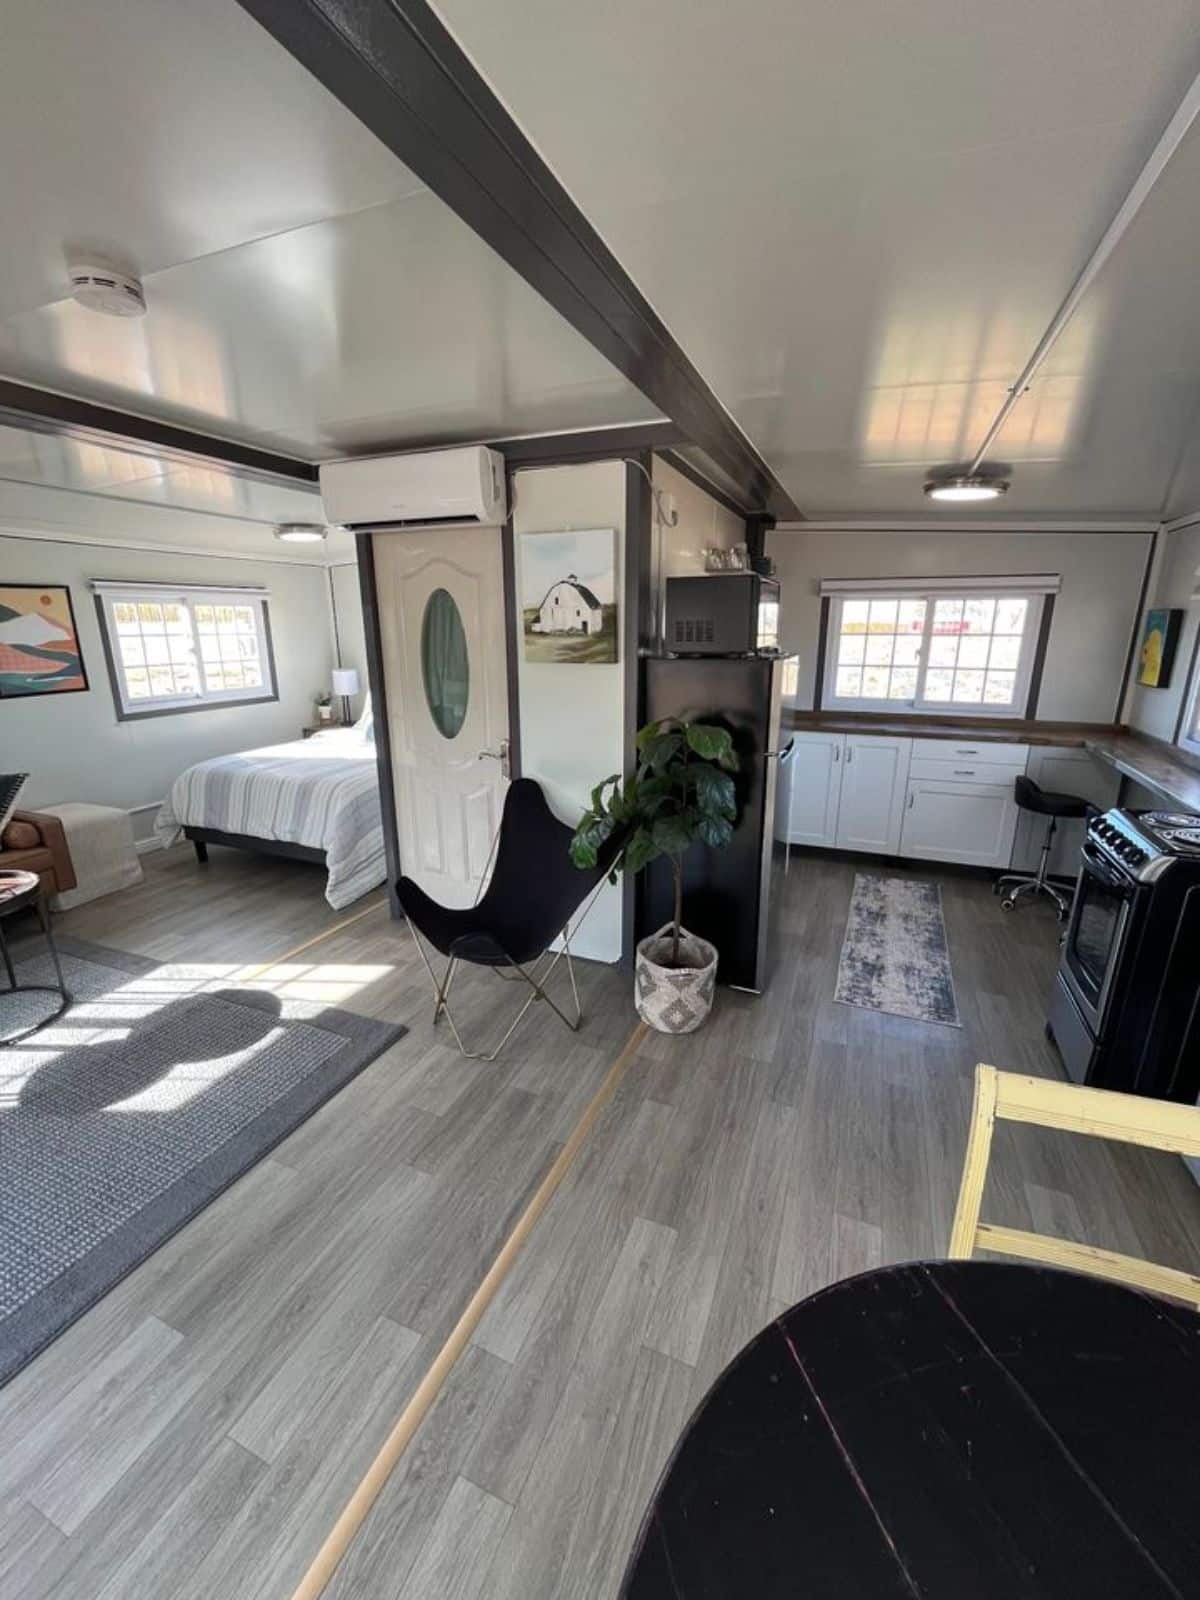 Overall interiors of 20’ unique tiny home